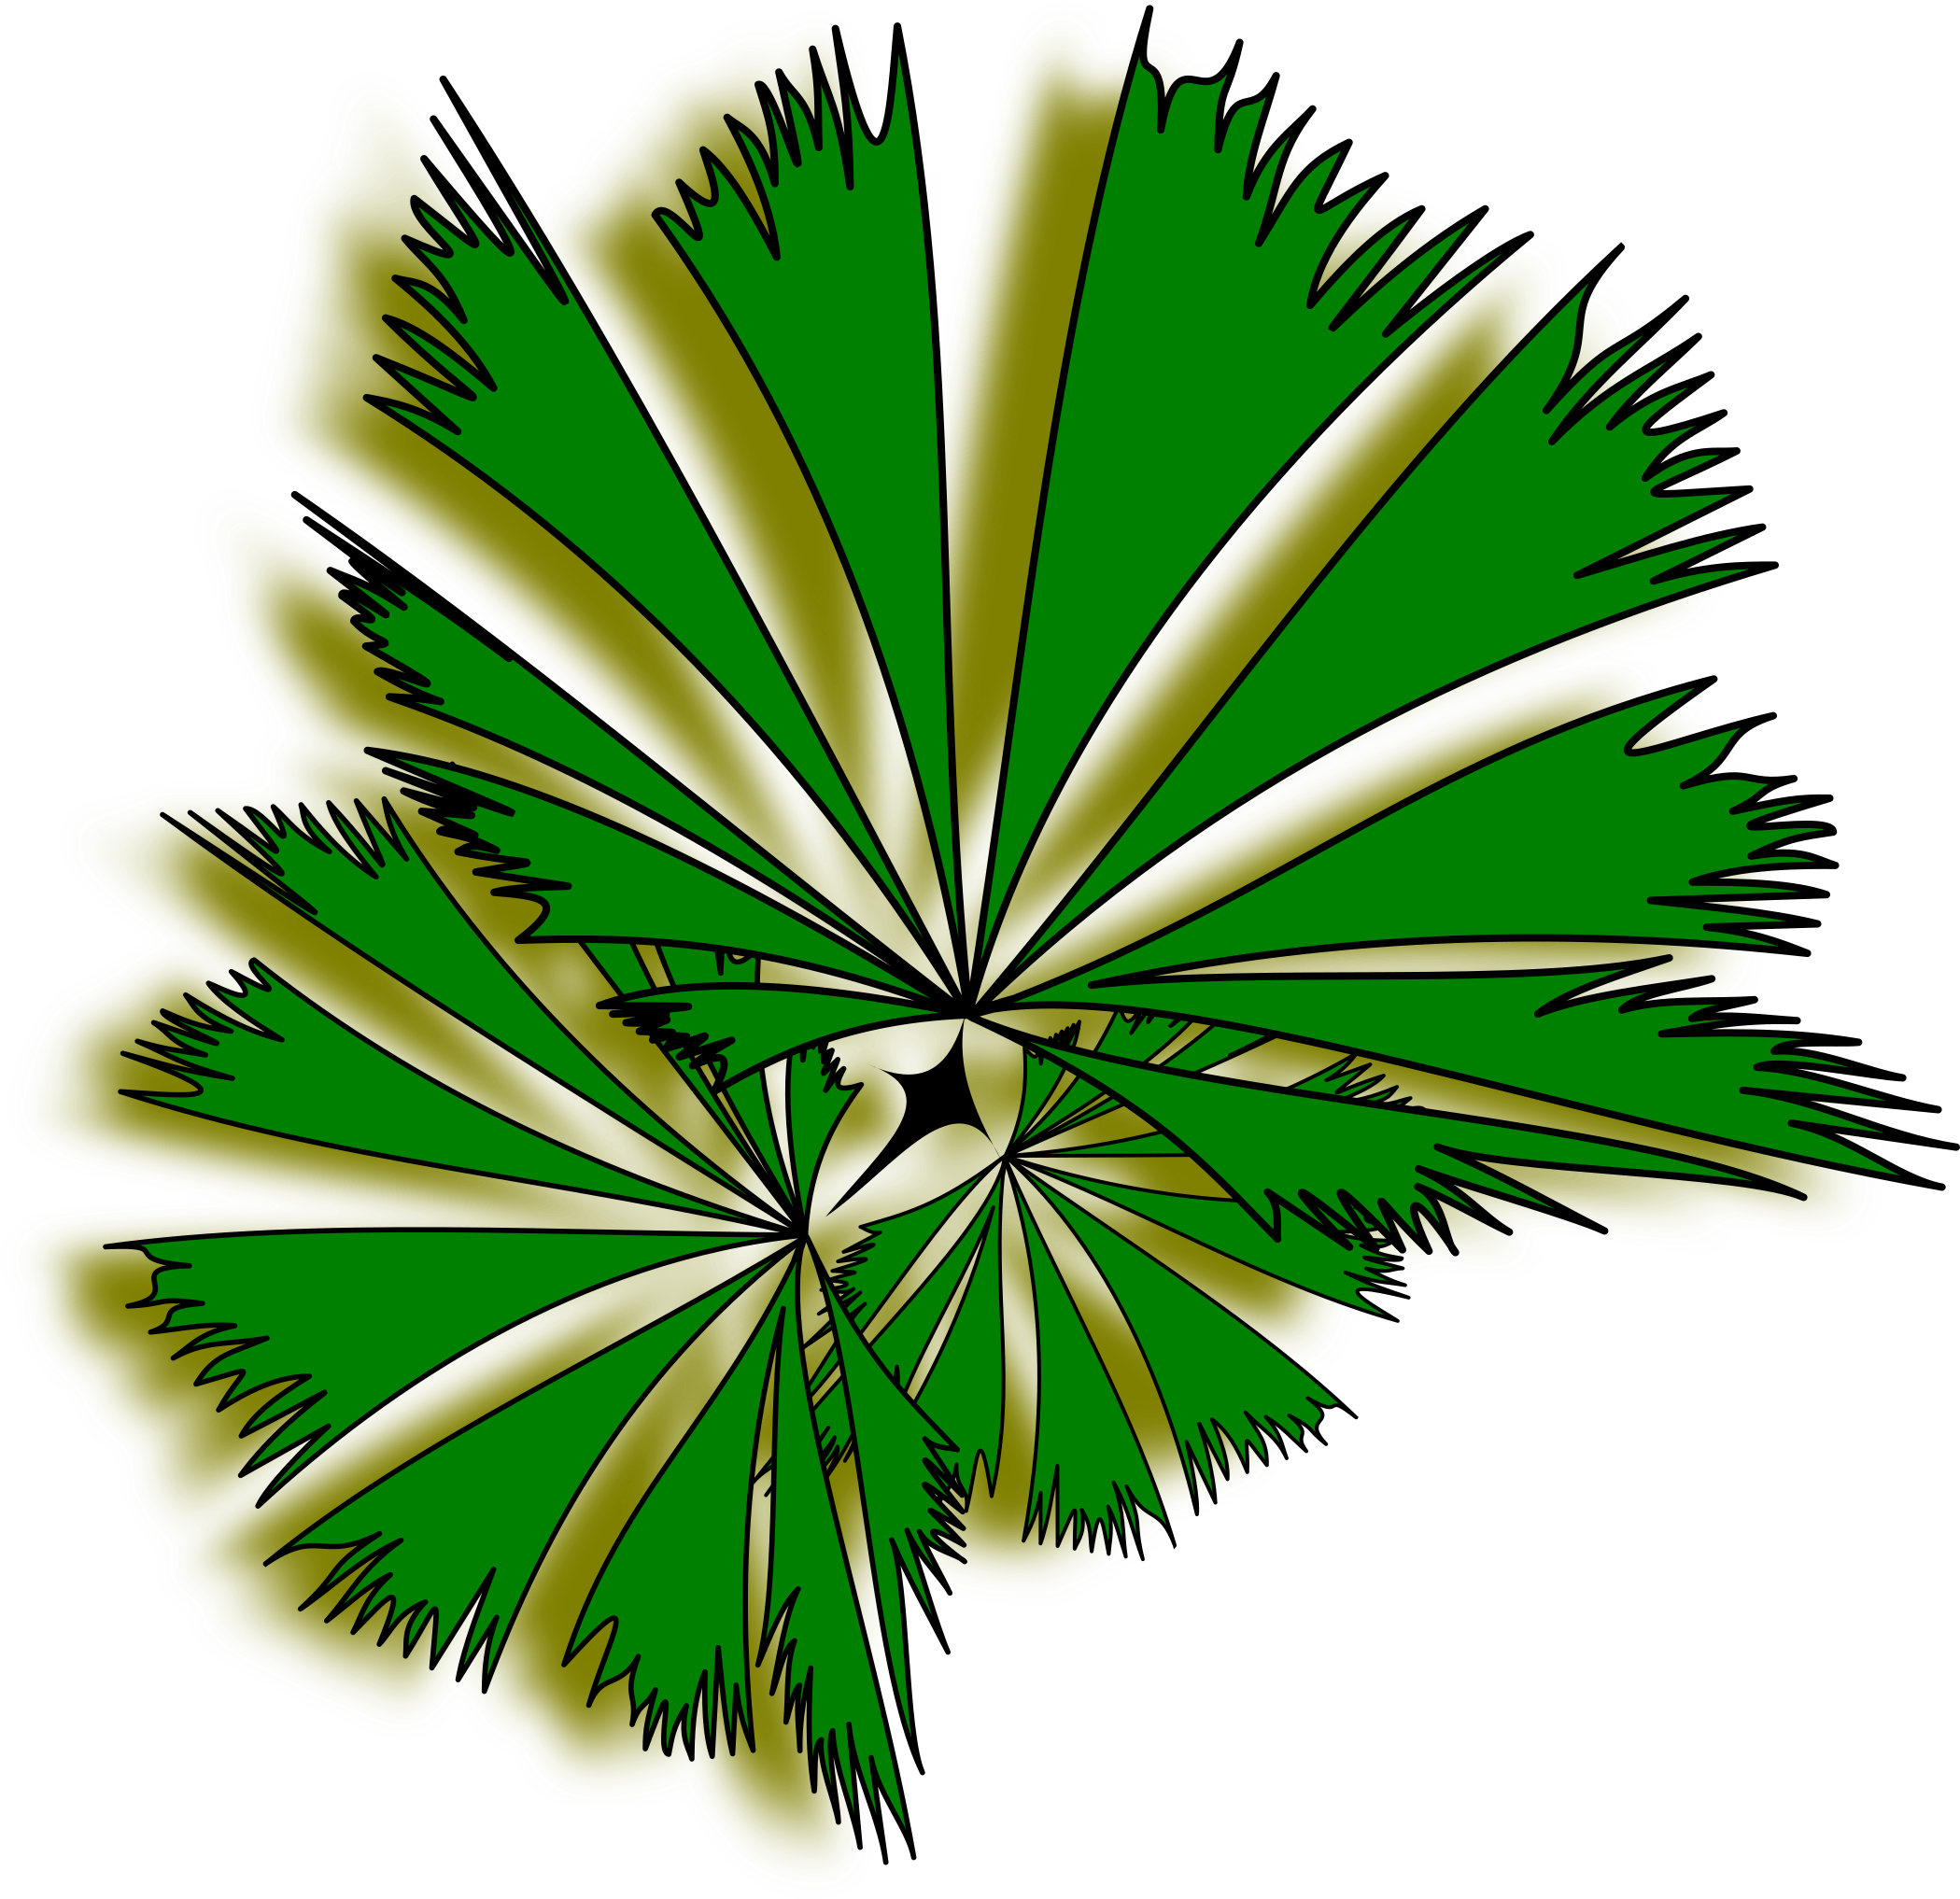 Palm Tree Clip Art Top View Clipart - Palm Tree Top View Clipart (2400x2400)